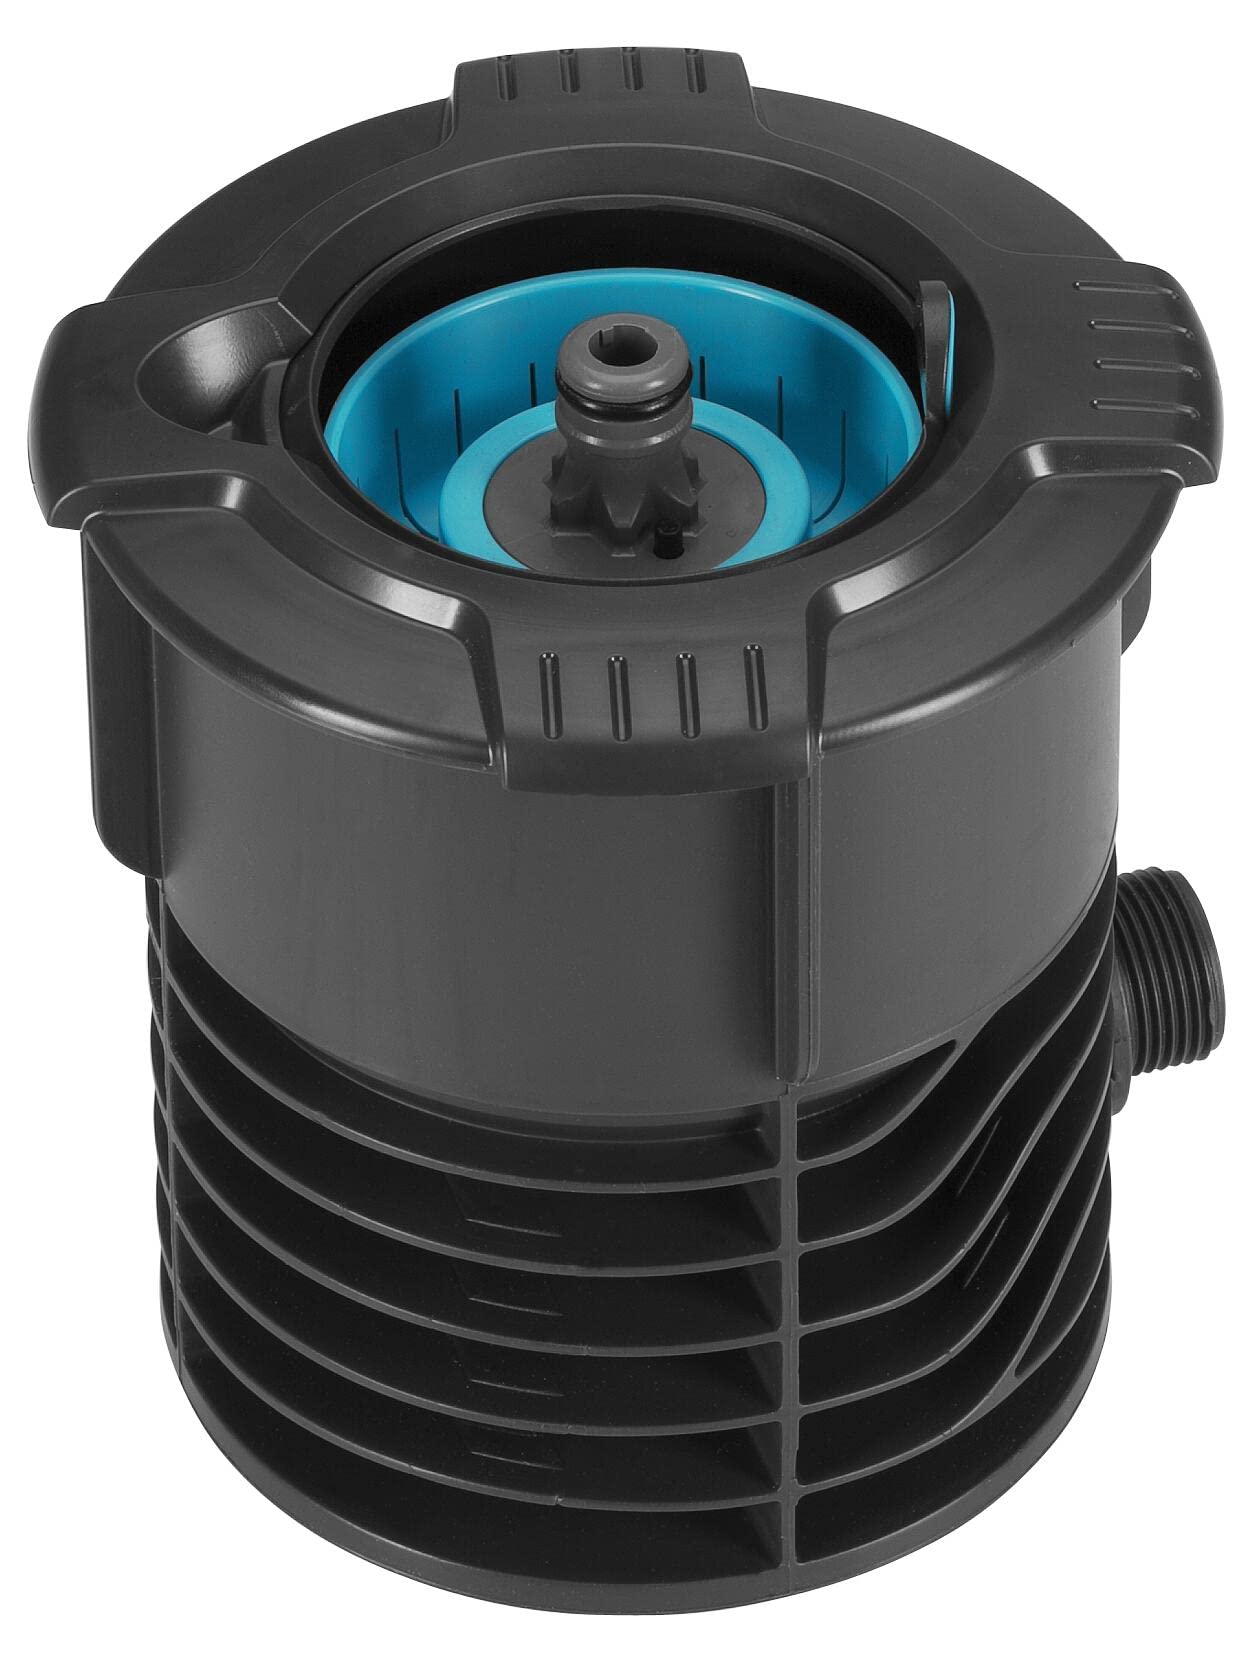 Gardena Sprinkler System Water Plug with 3/4 inch External Thread: Water Intake of The Pipeline System, Integrated Stop Valve, R